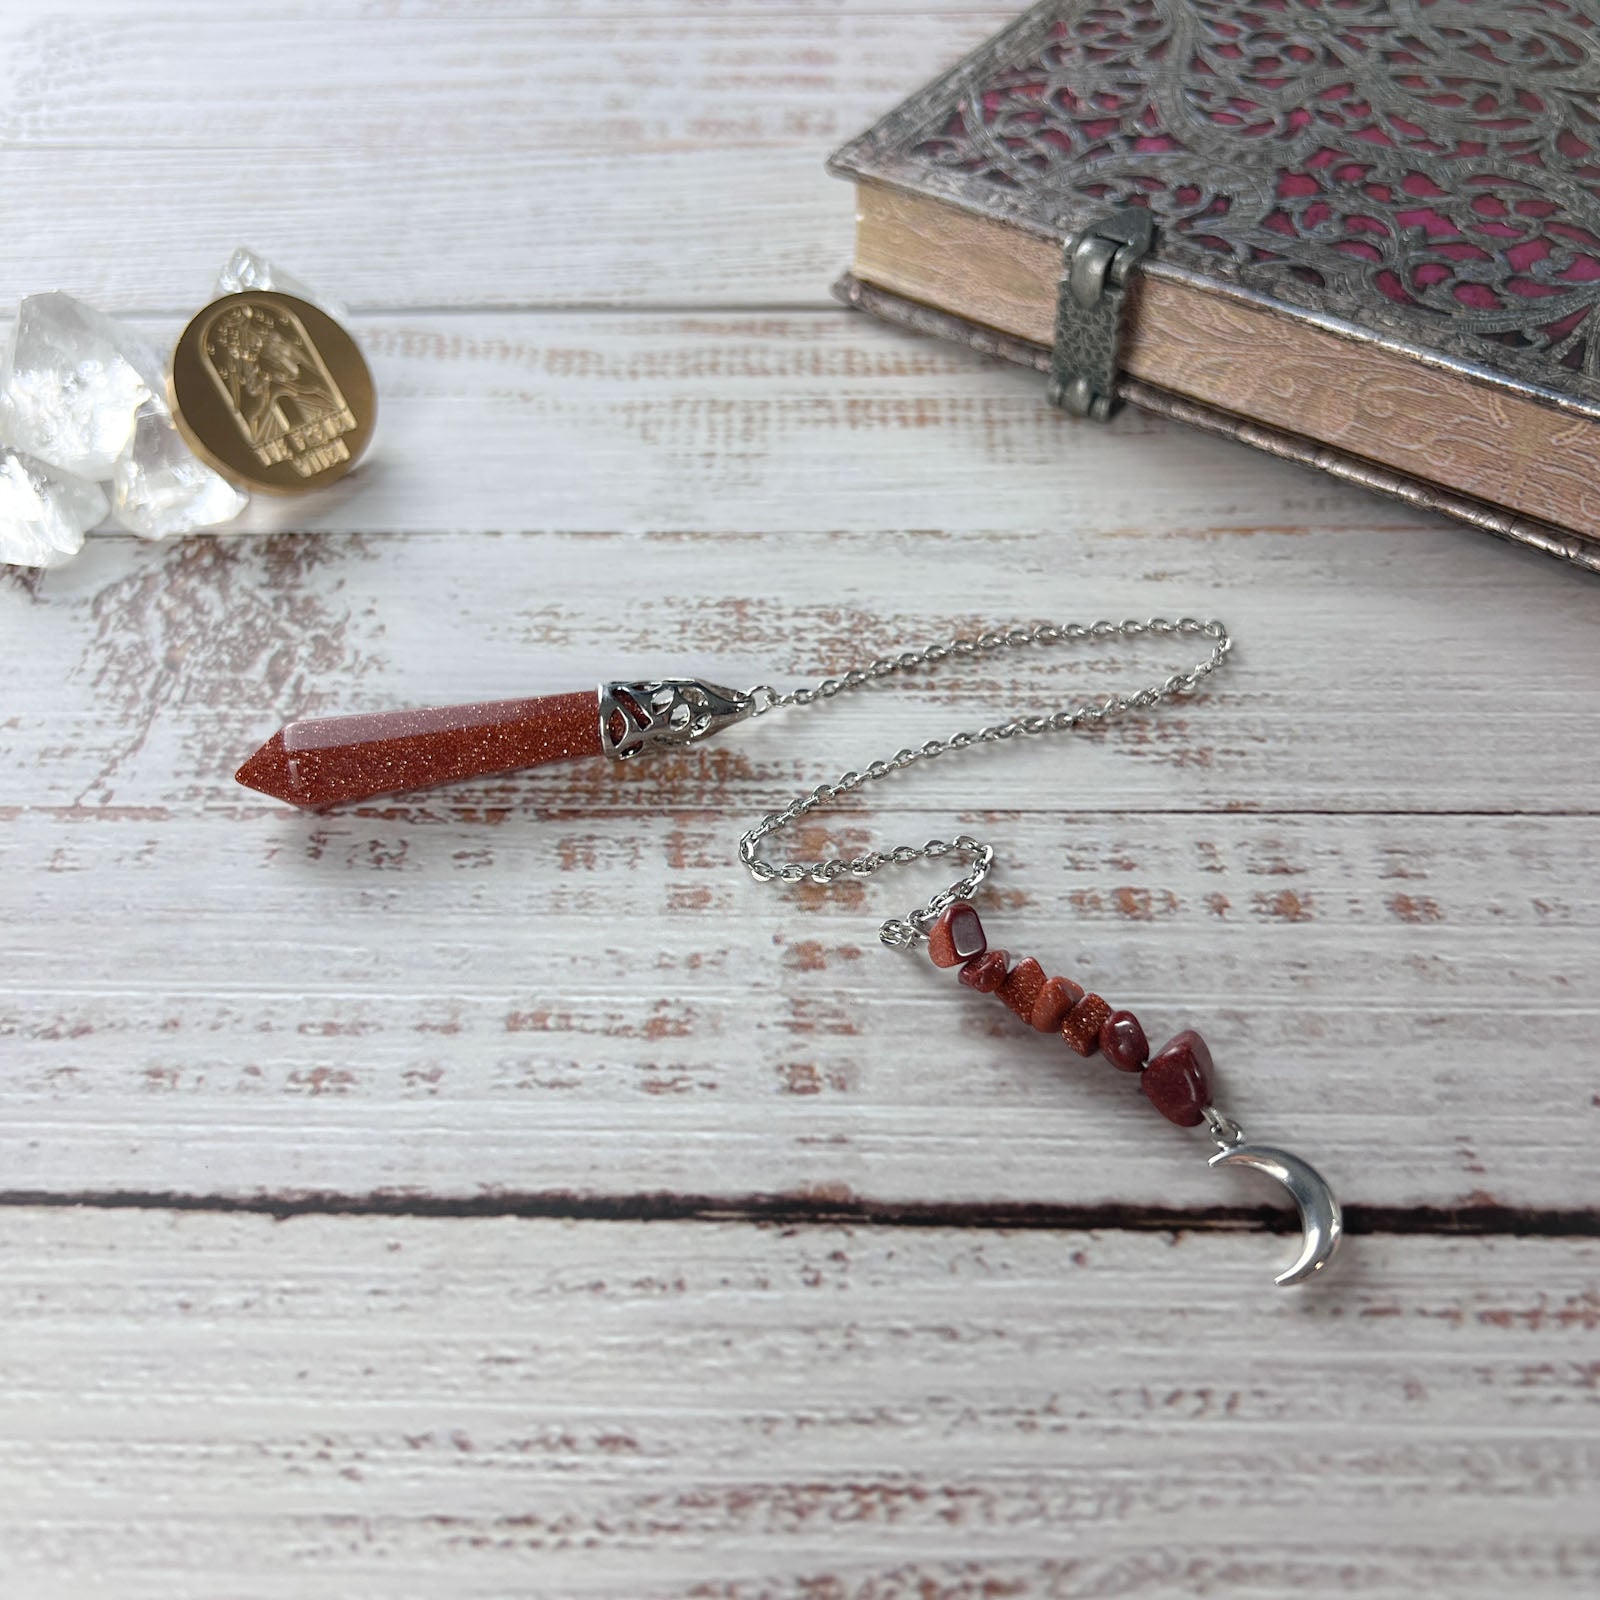 Goldstone pendulum with a crescent moon